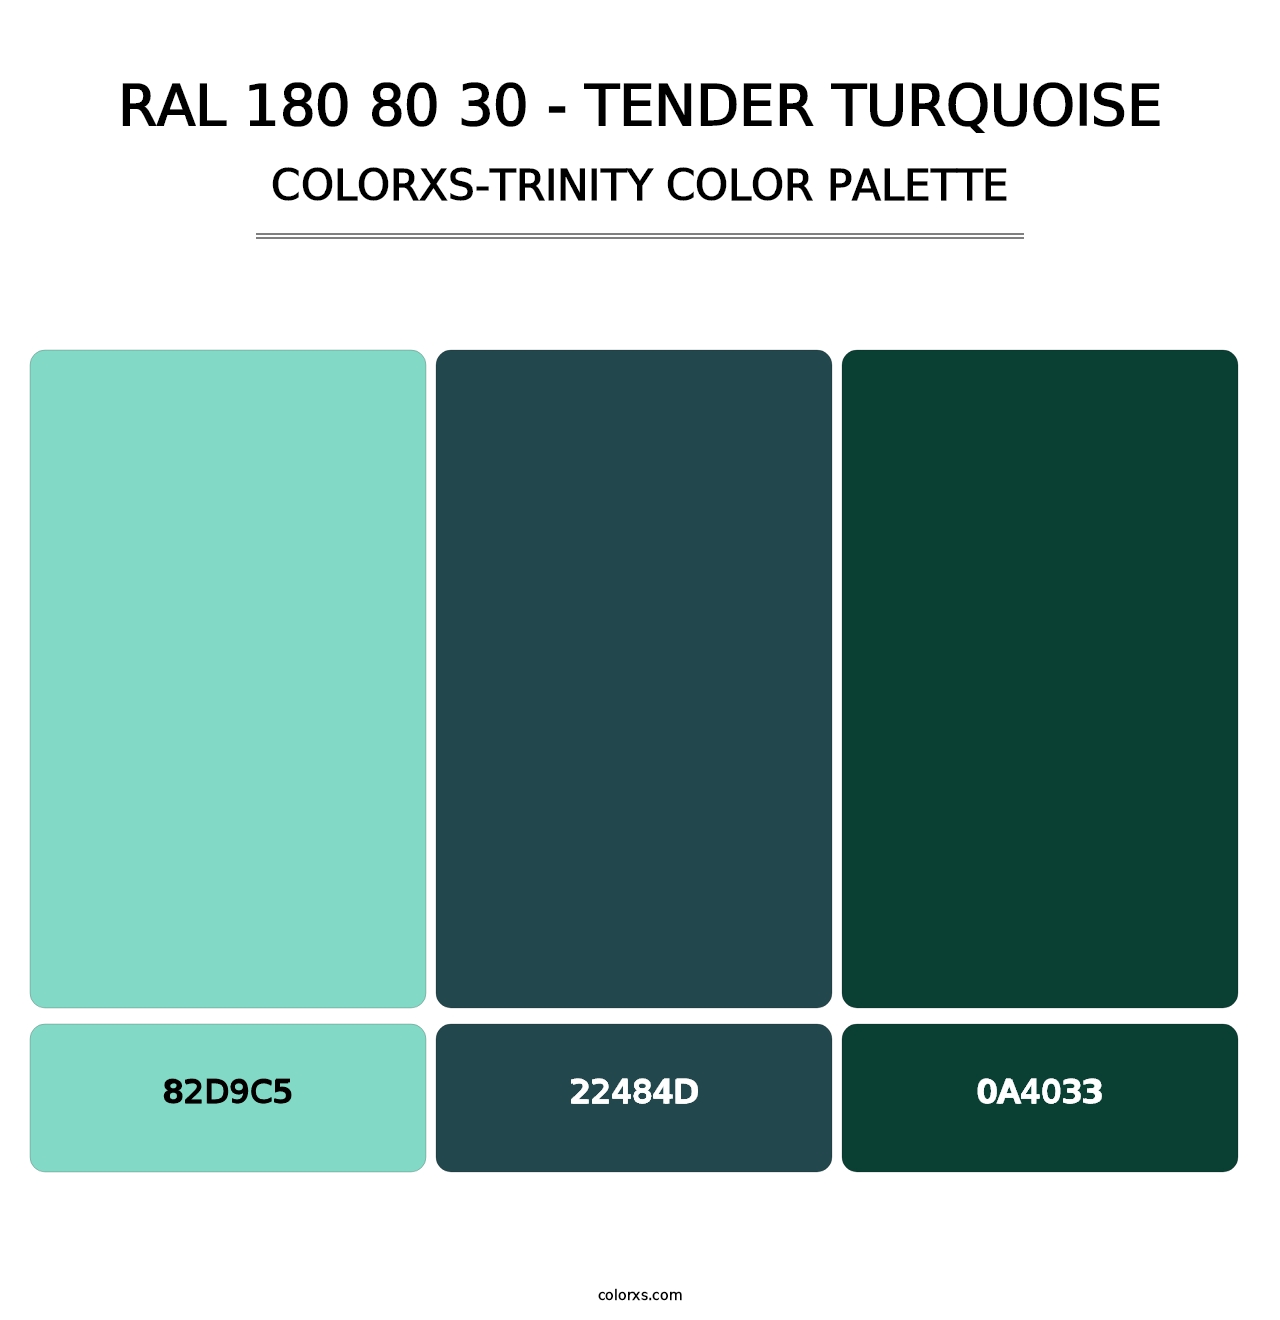 RAL 180 80 30 - Tender Turquoise - Colorxs Trinity Palette